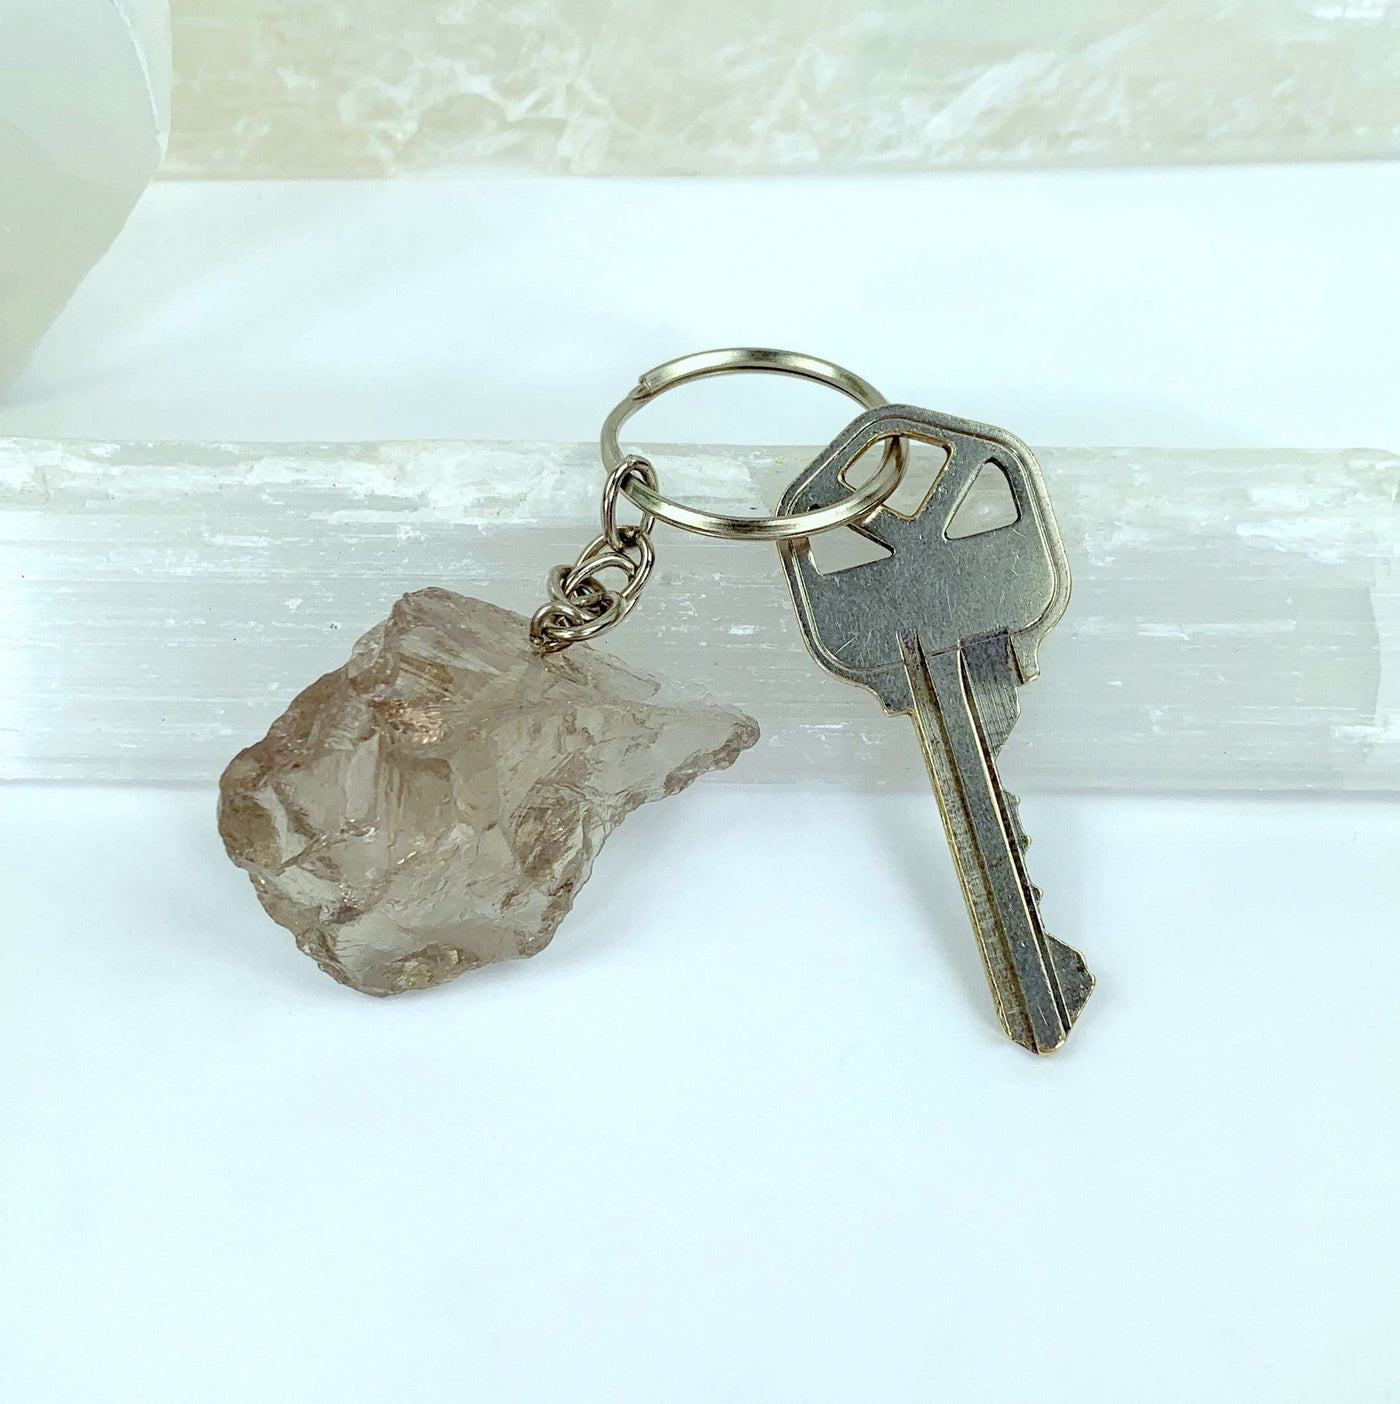 Natural Smoky Quartz Keychains - one with a key on it